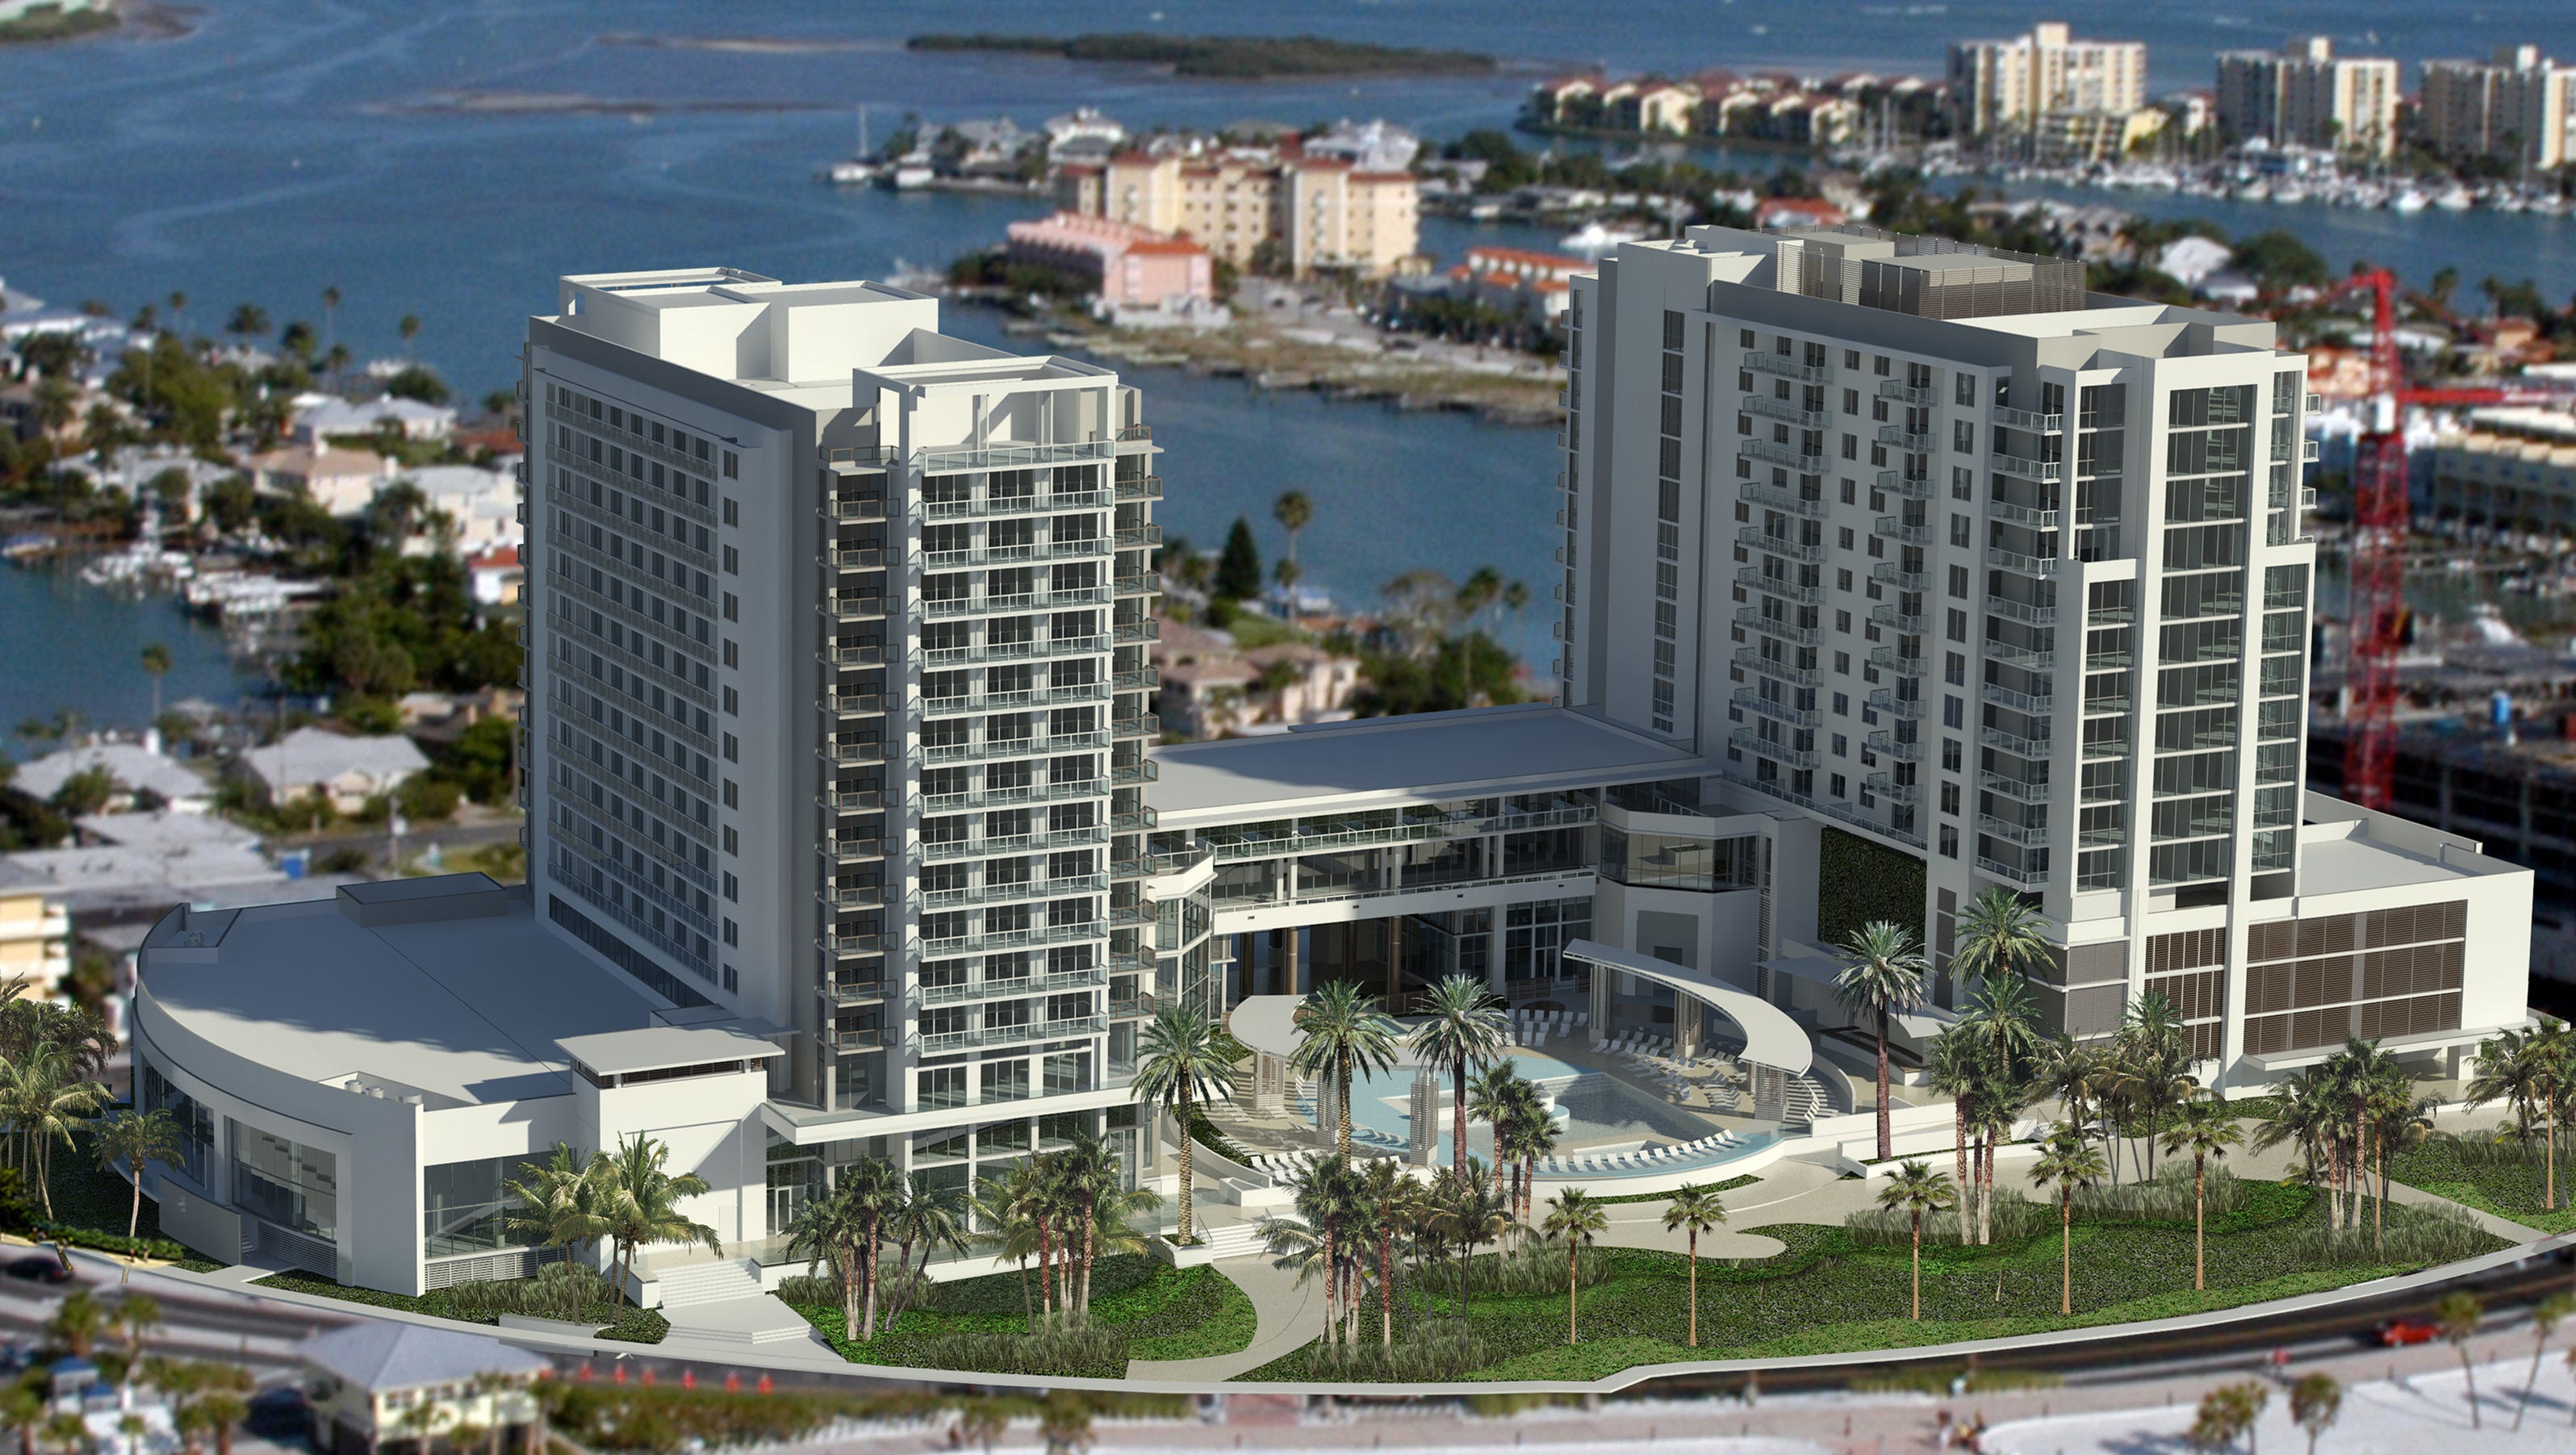 New hotels will change face of Clearwater Beach - WTSP 10 News